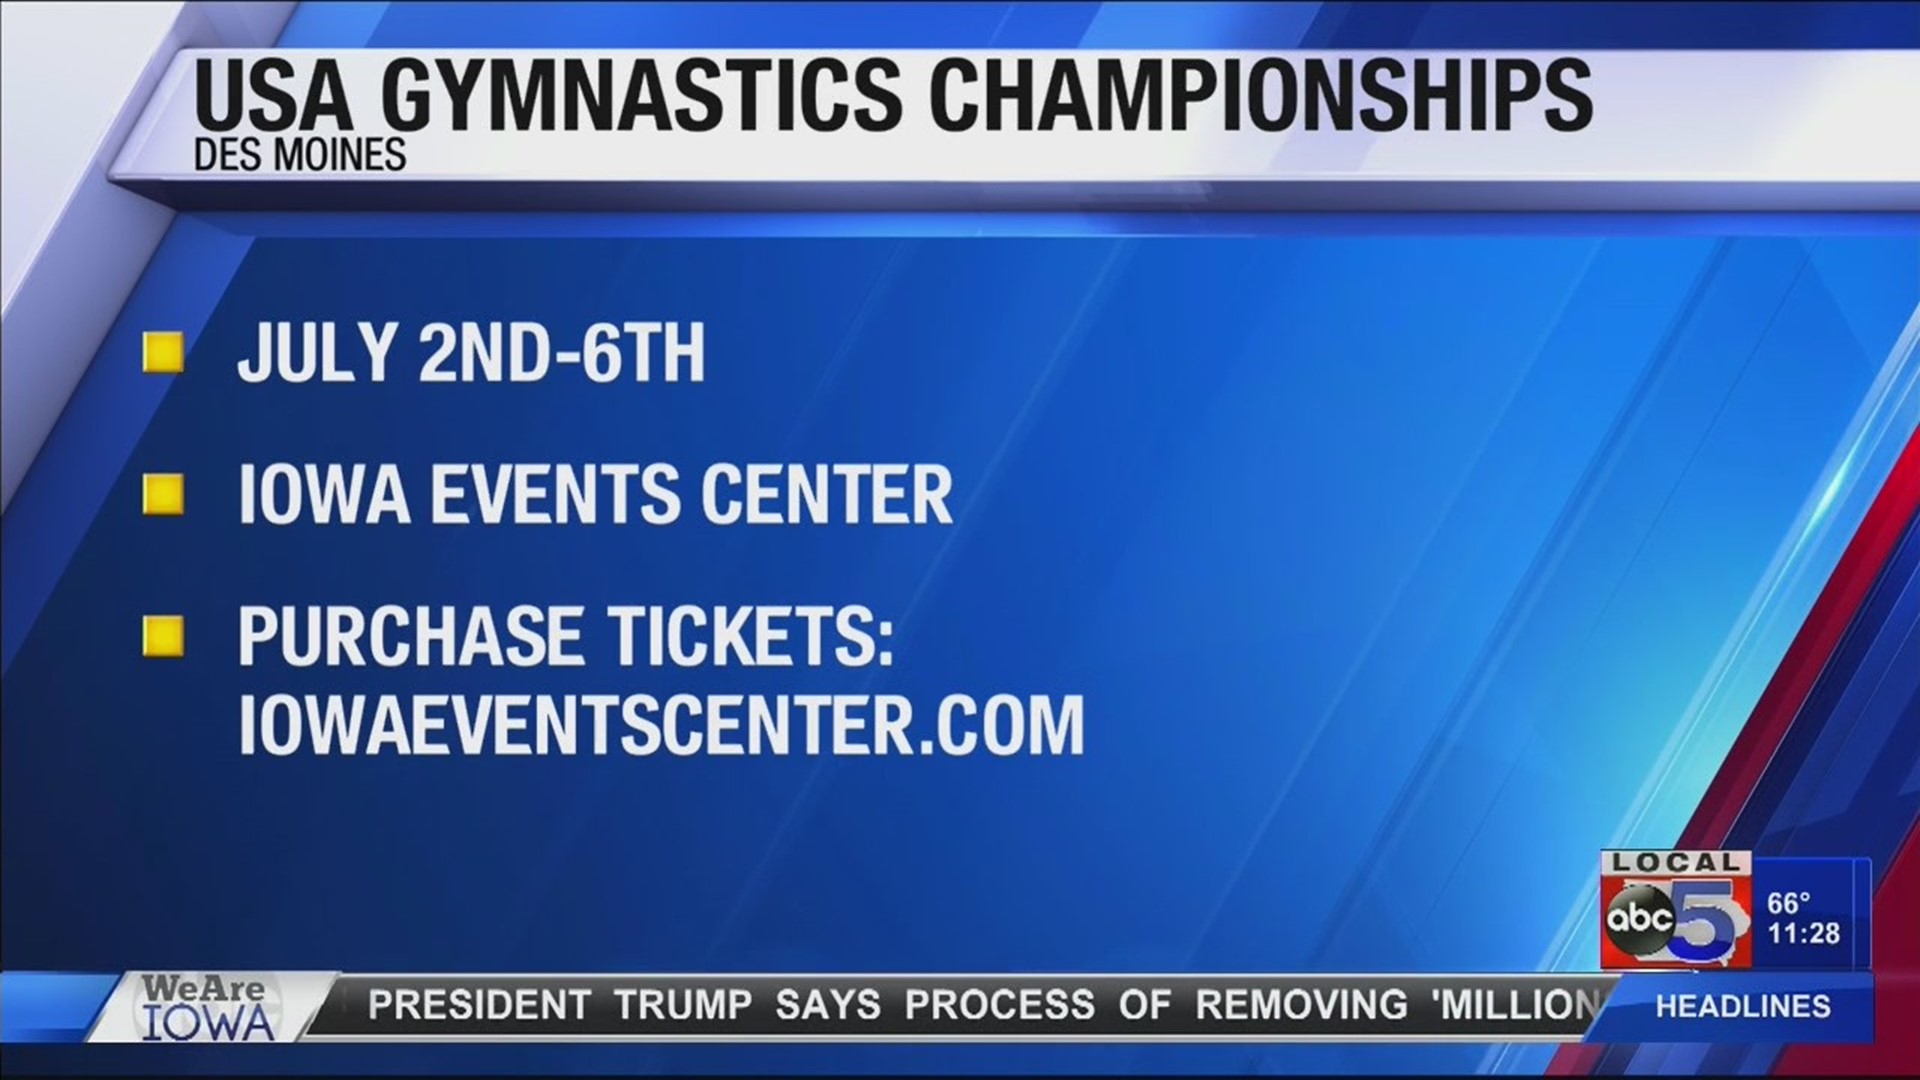 USA Gymnastics Championships coming to Des Moines